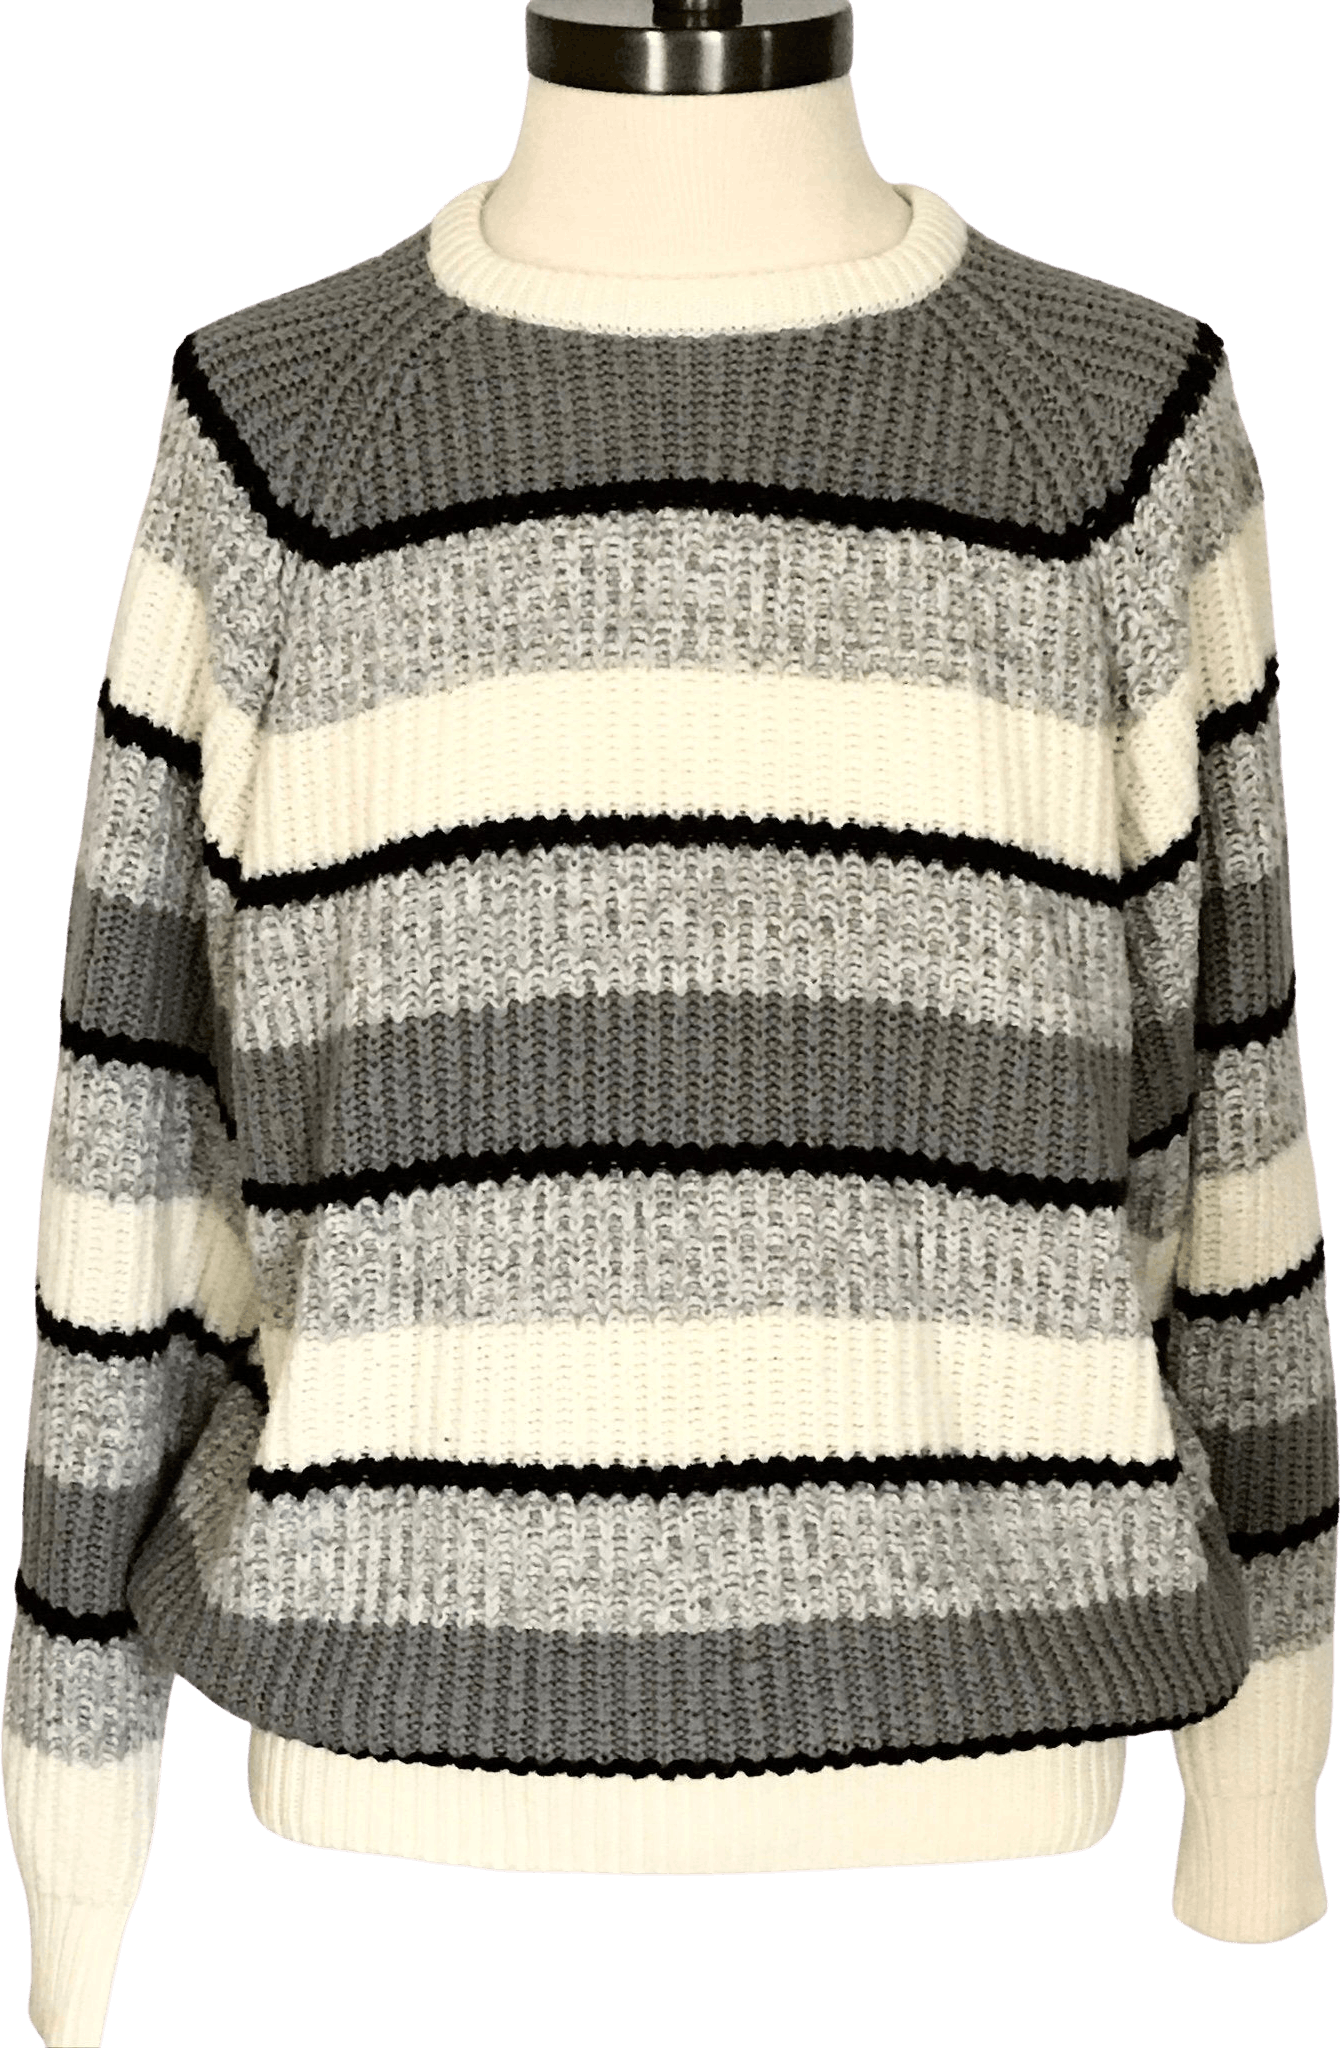 Vintage 80's/90's Gray and Off White Striped Knit Sweater by ...